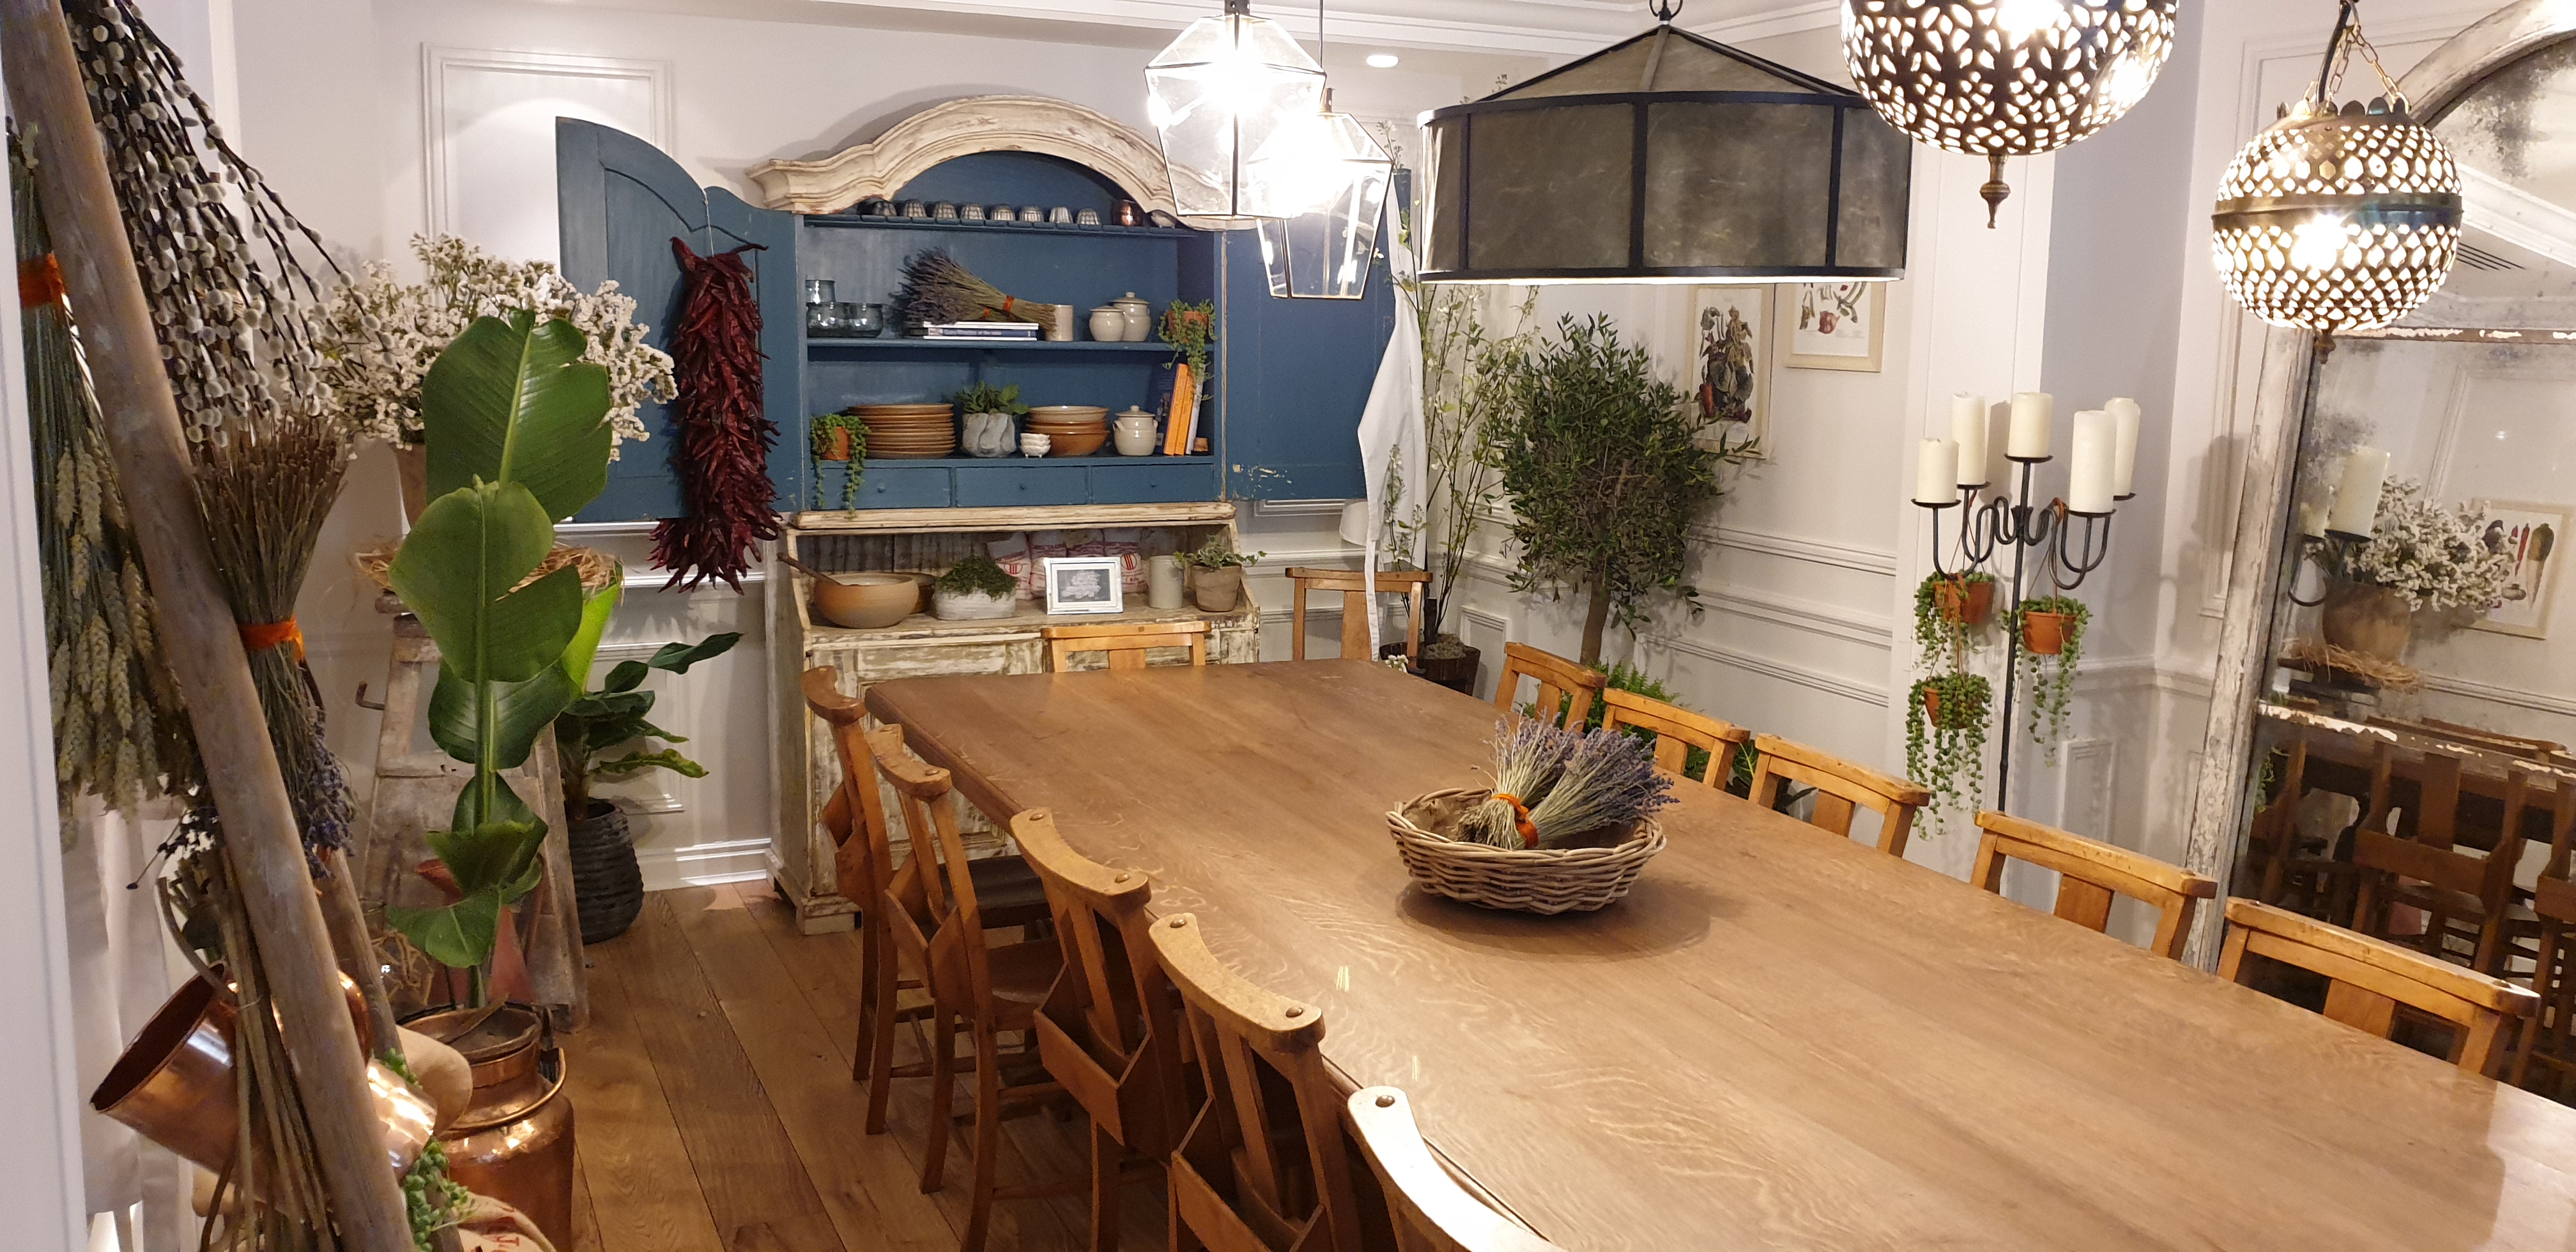 Buy antique Church chairs from UKAA. Genuine old Victorian Church and Chapel chairs fitted in a happy customer home around their dining table. Read more